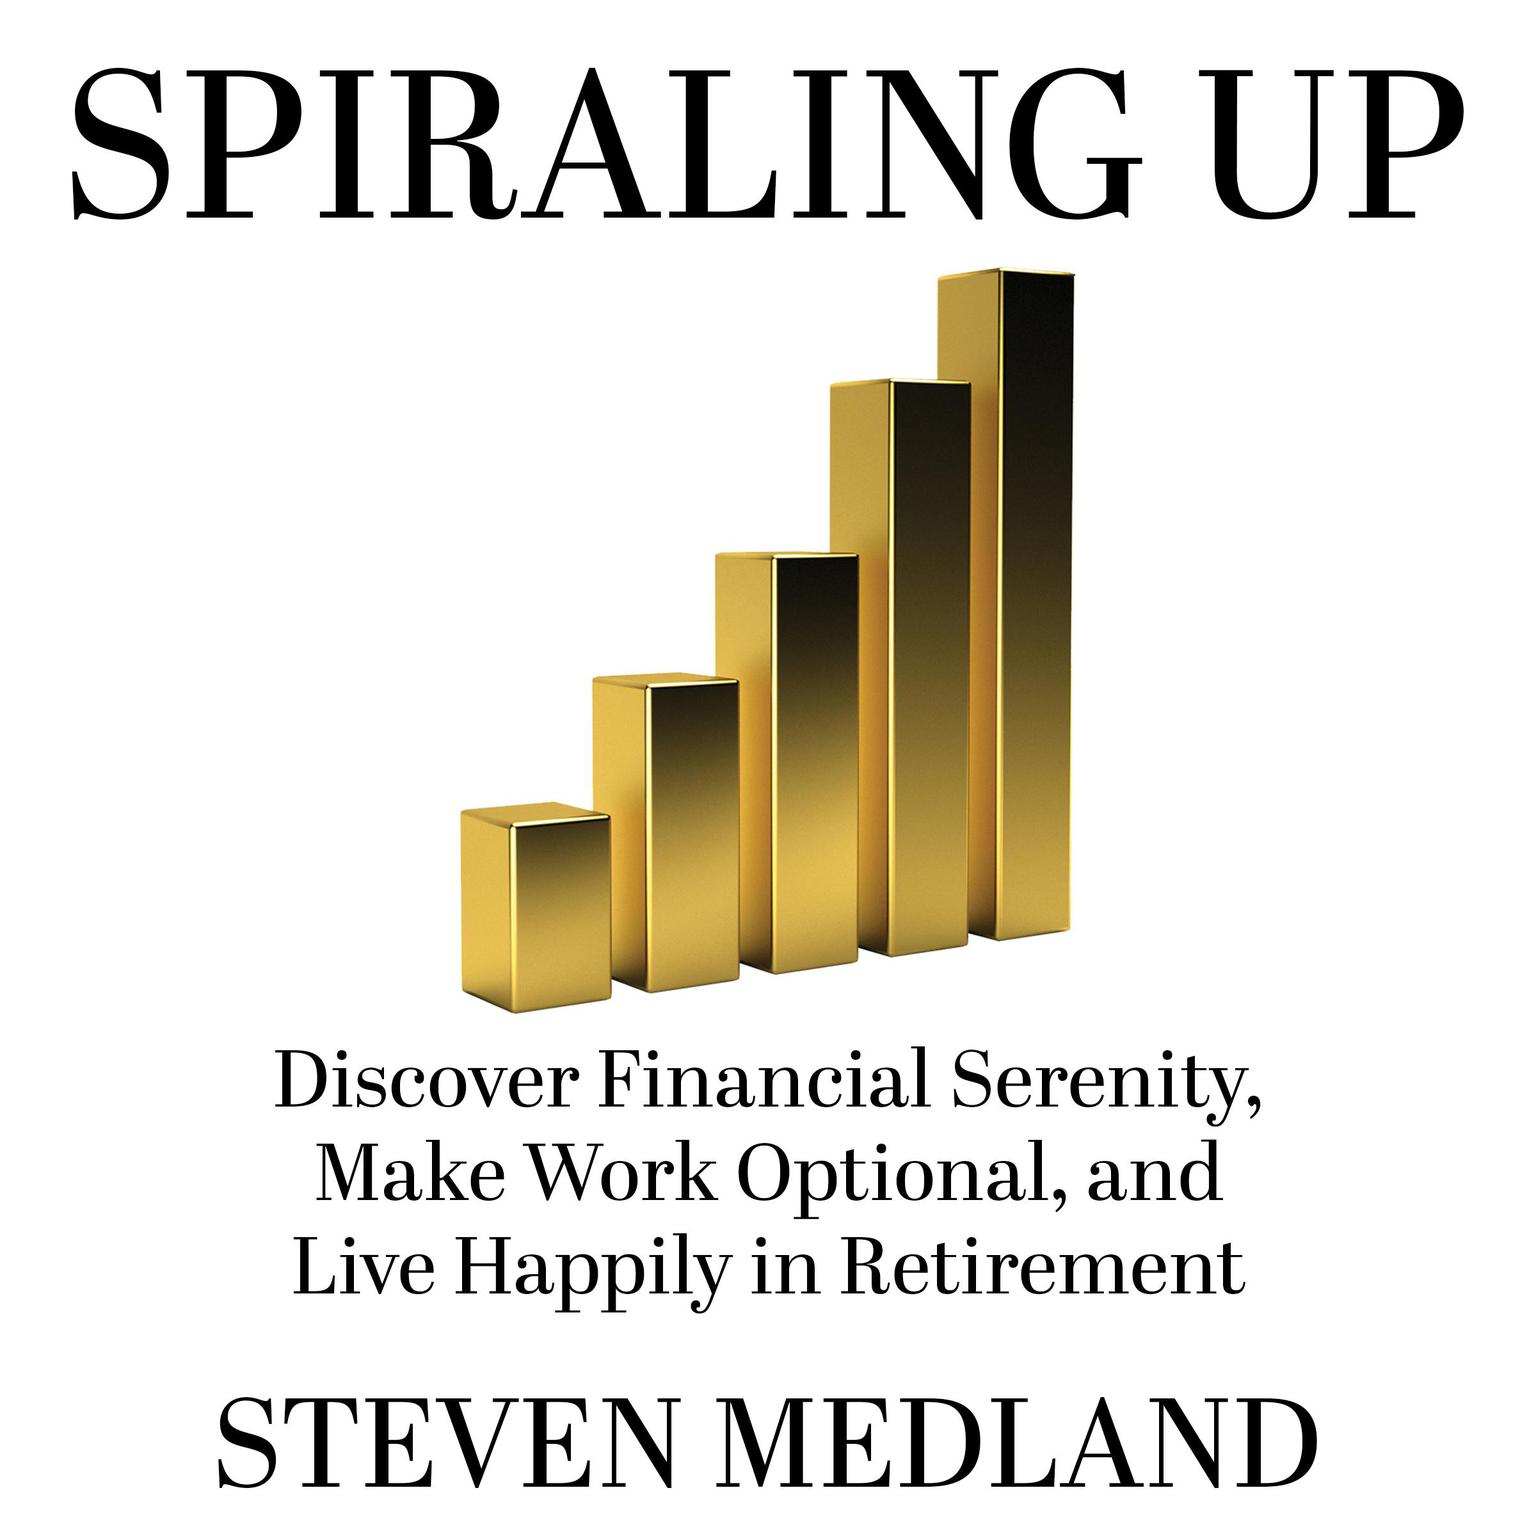 Spiraling Up: Discover Financial Serenity, Make Work Optional, and Live Happily in Retirement Audiobook, by Steven Medland